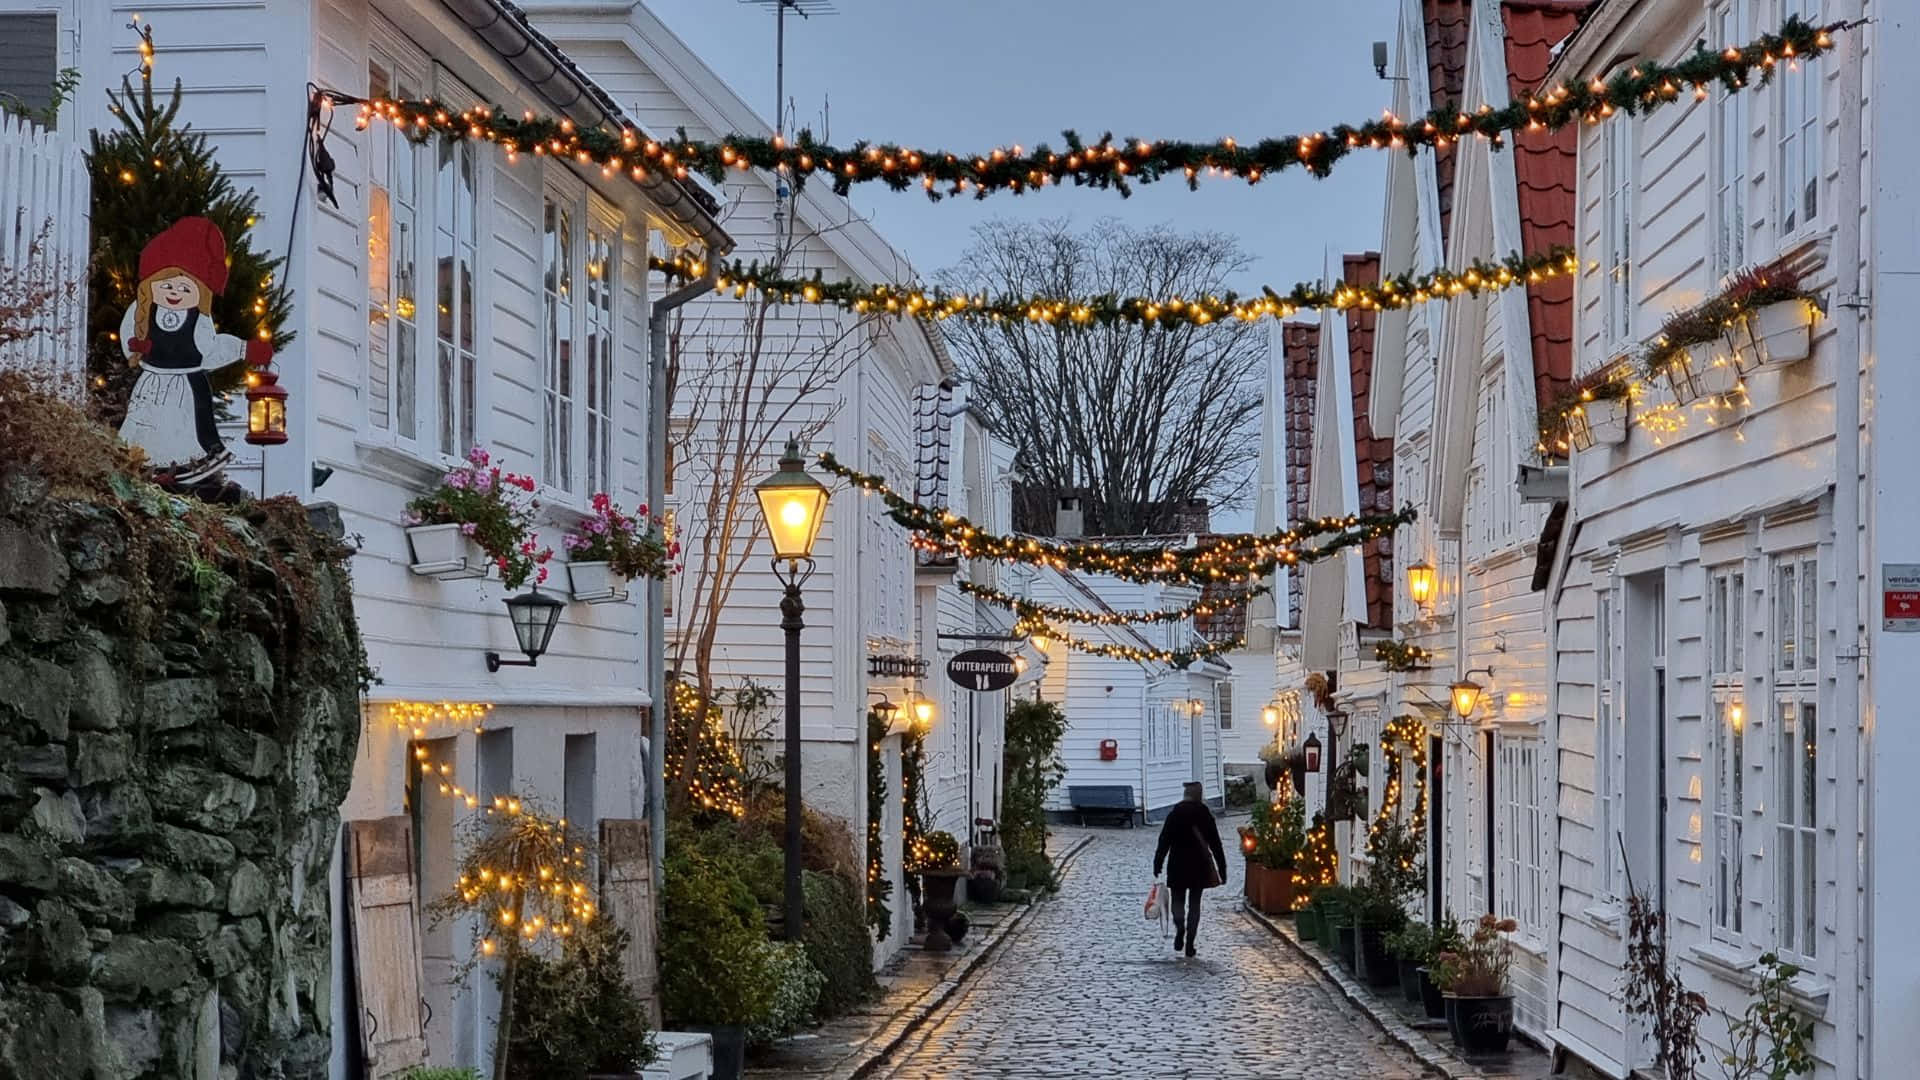 Stavanger Old Town Christmas Decorations Wallpaper